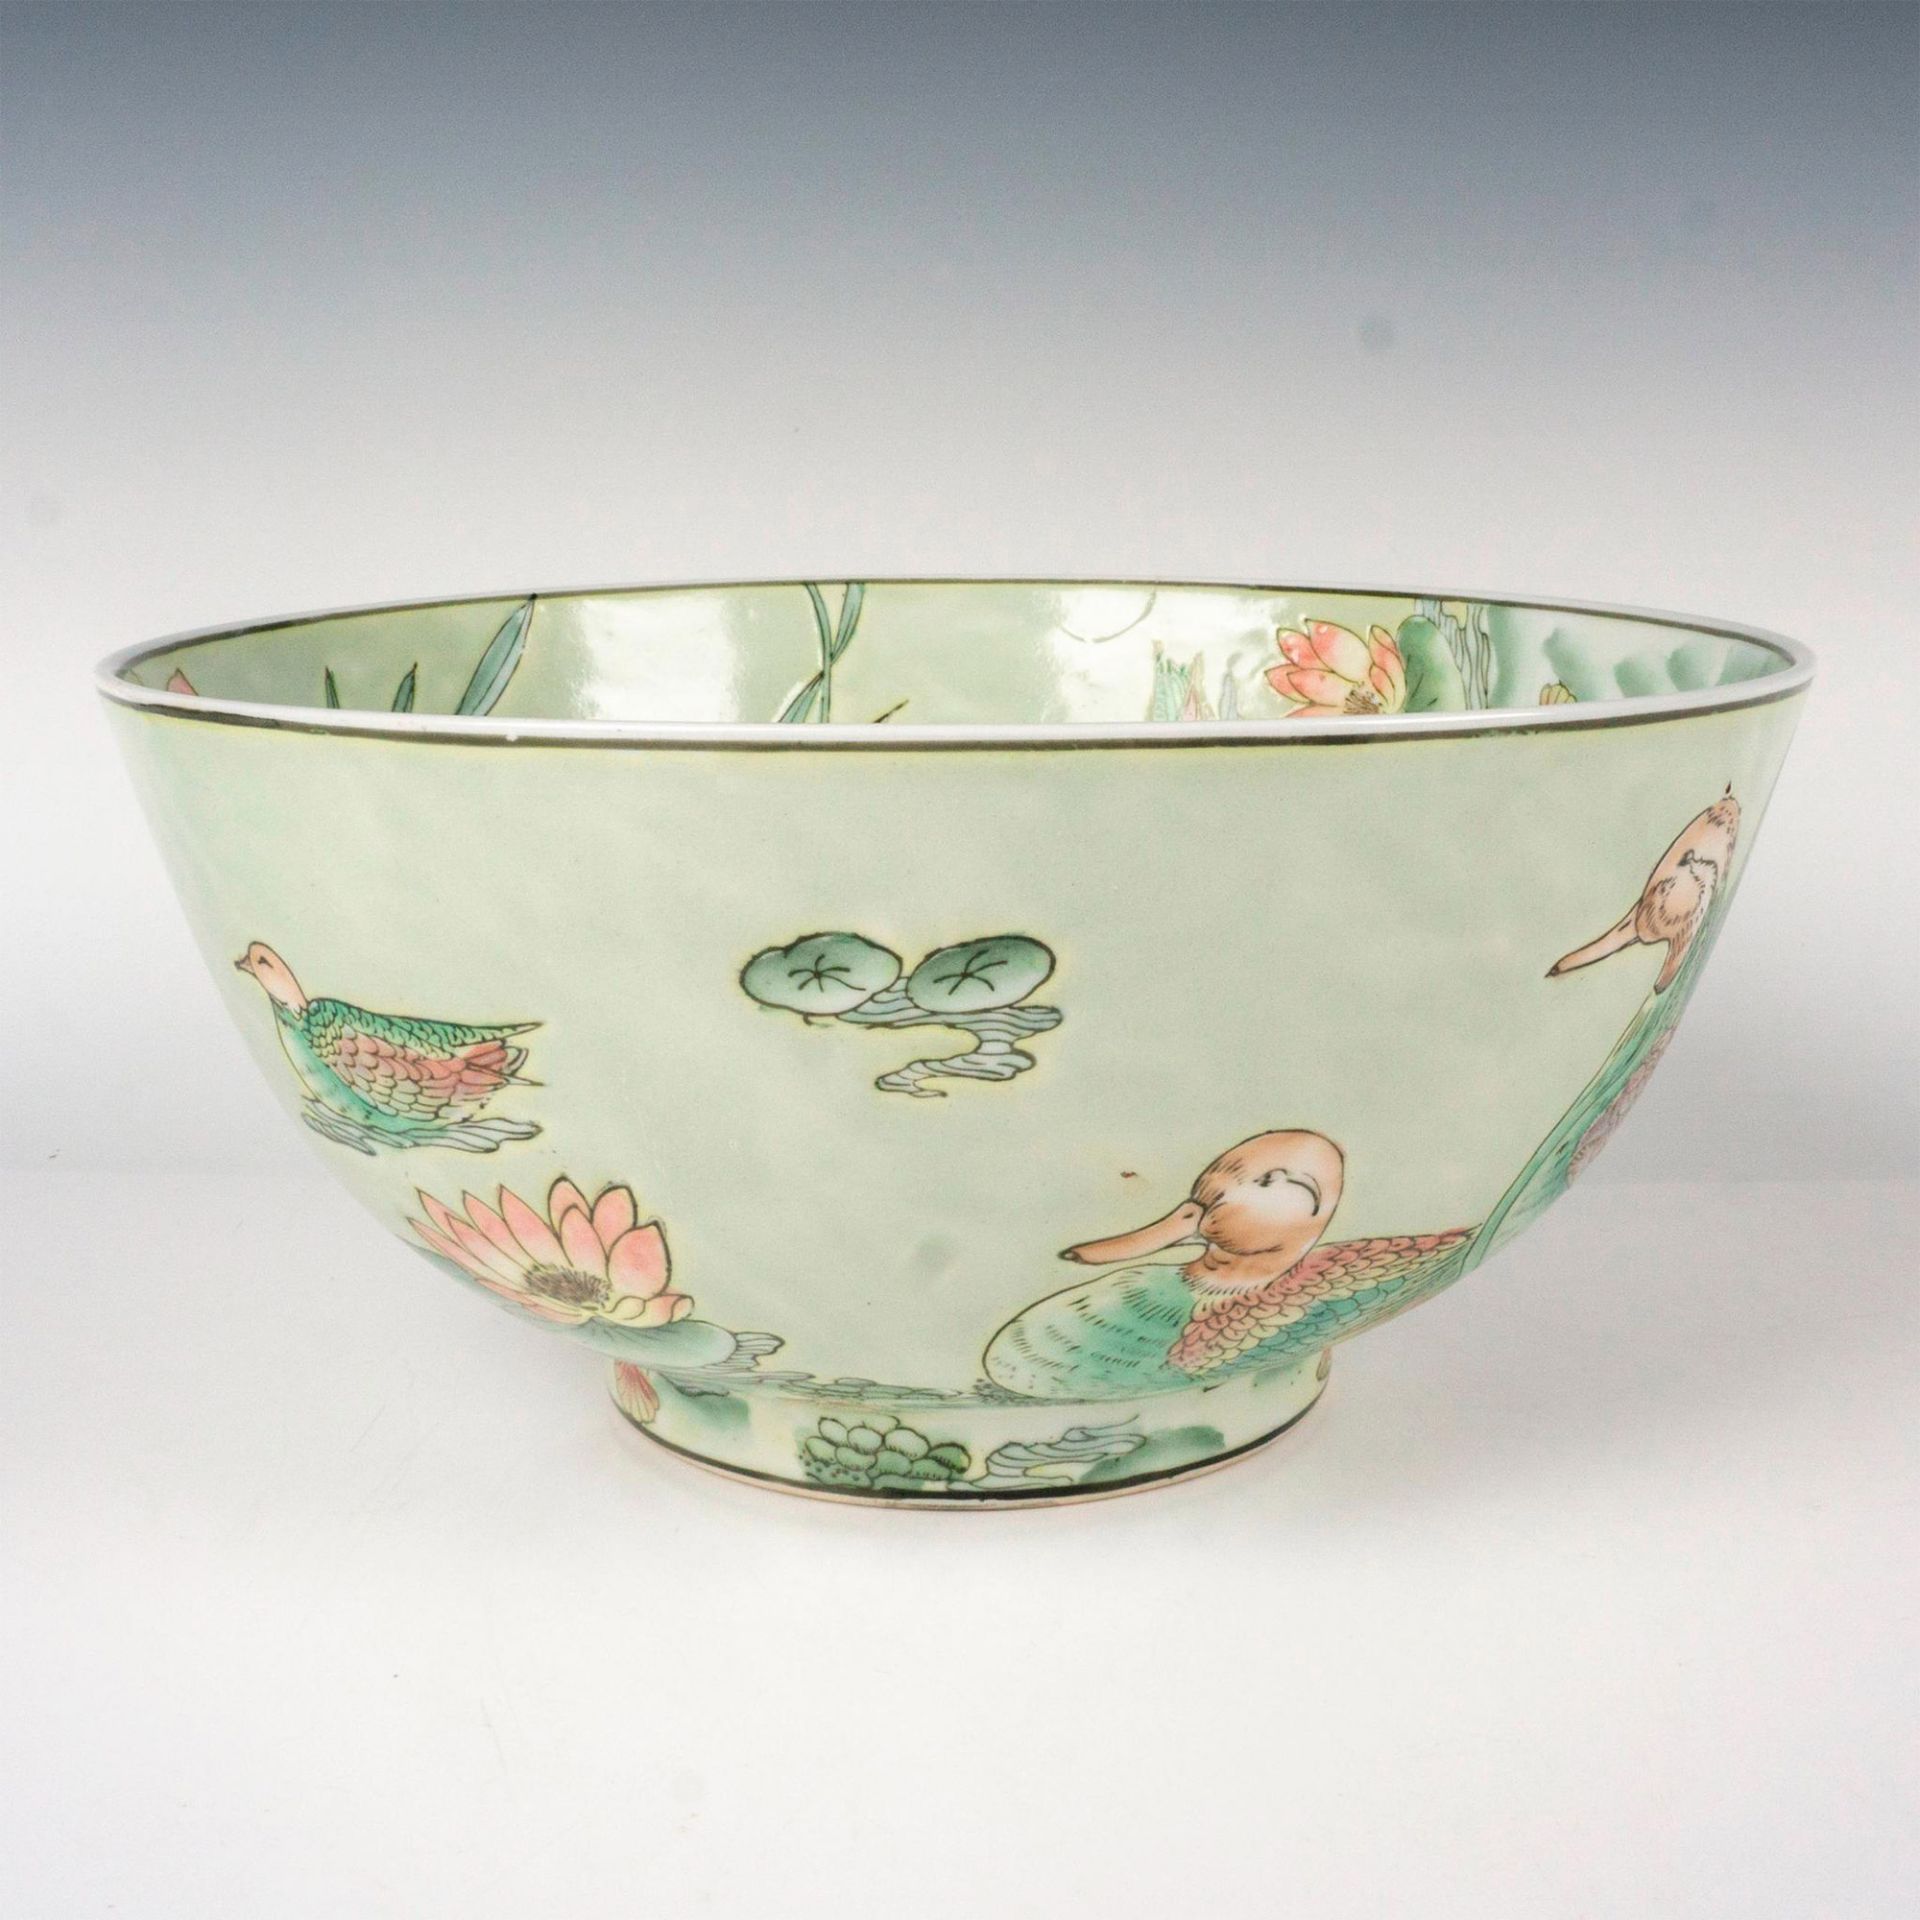 Chinese Porcelain Celadon Painted Duck Bowl - Image 2 of 5